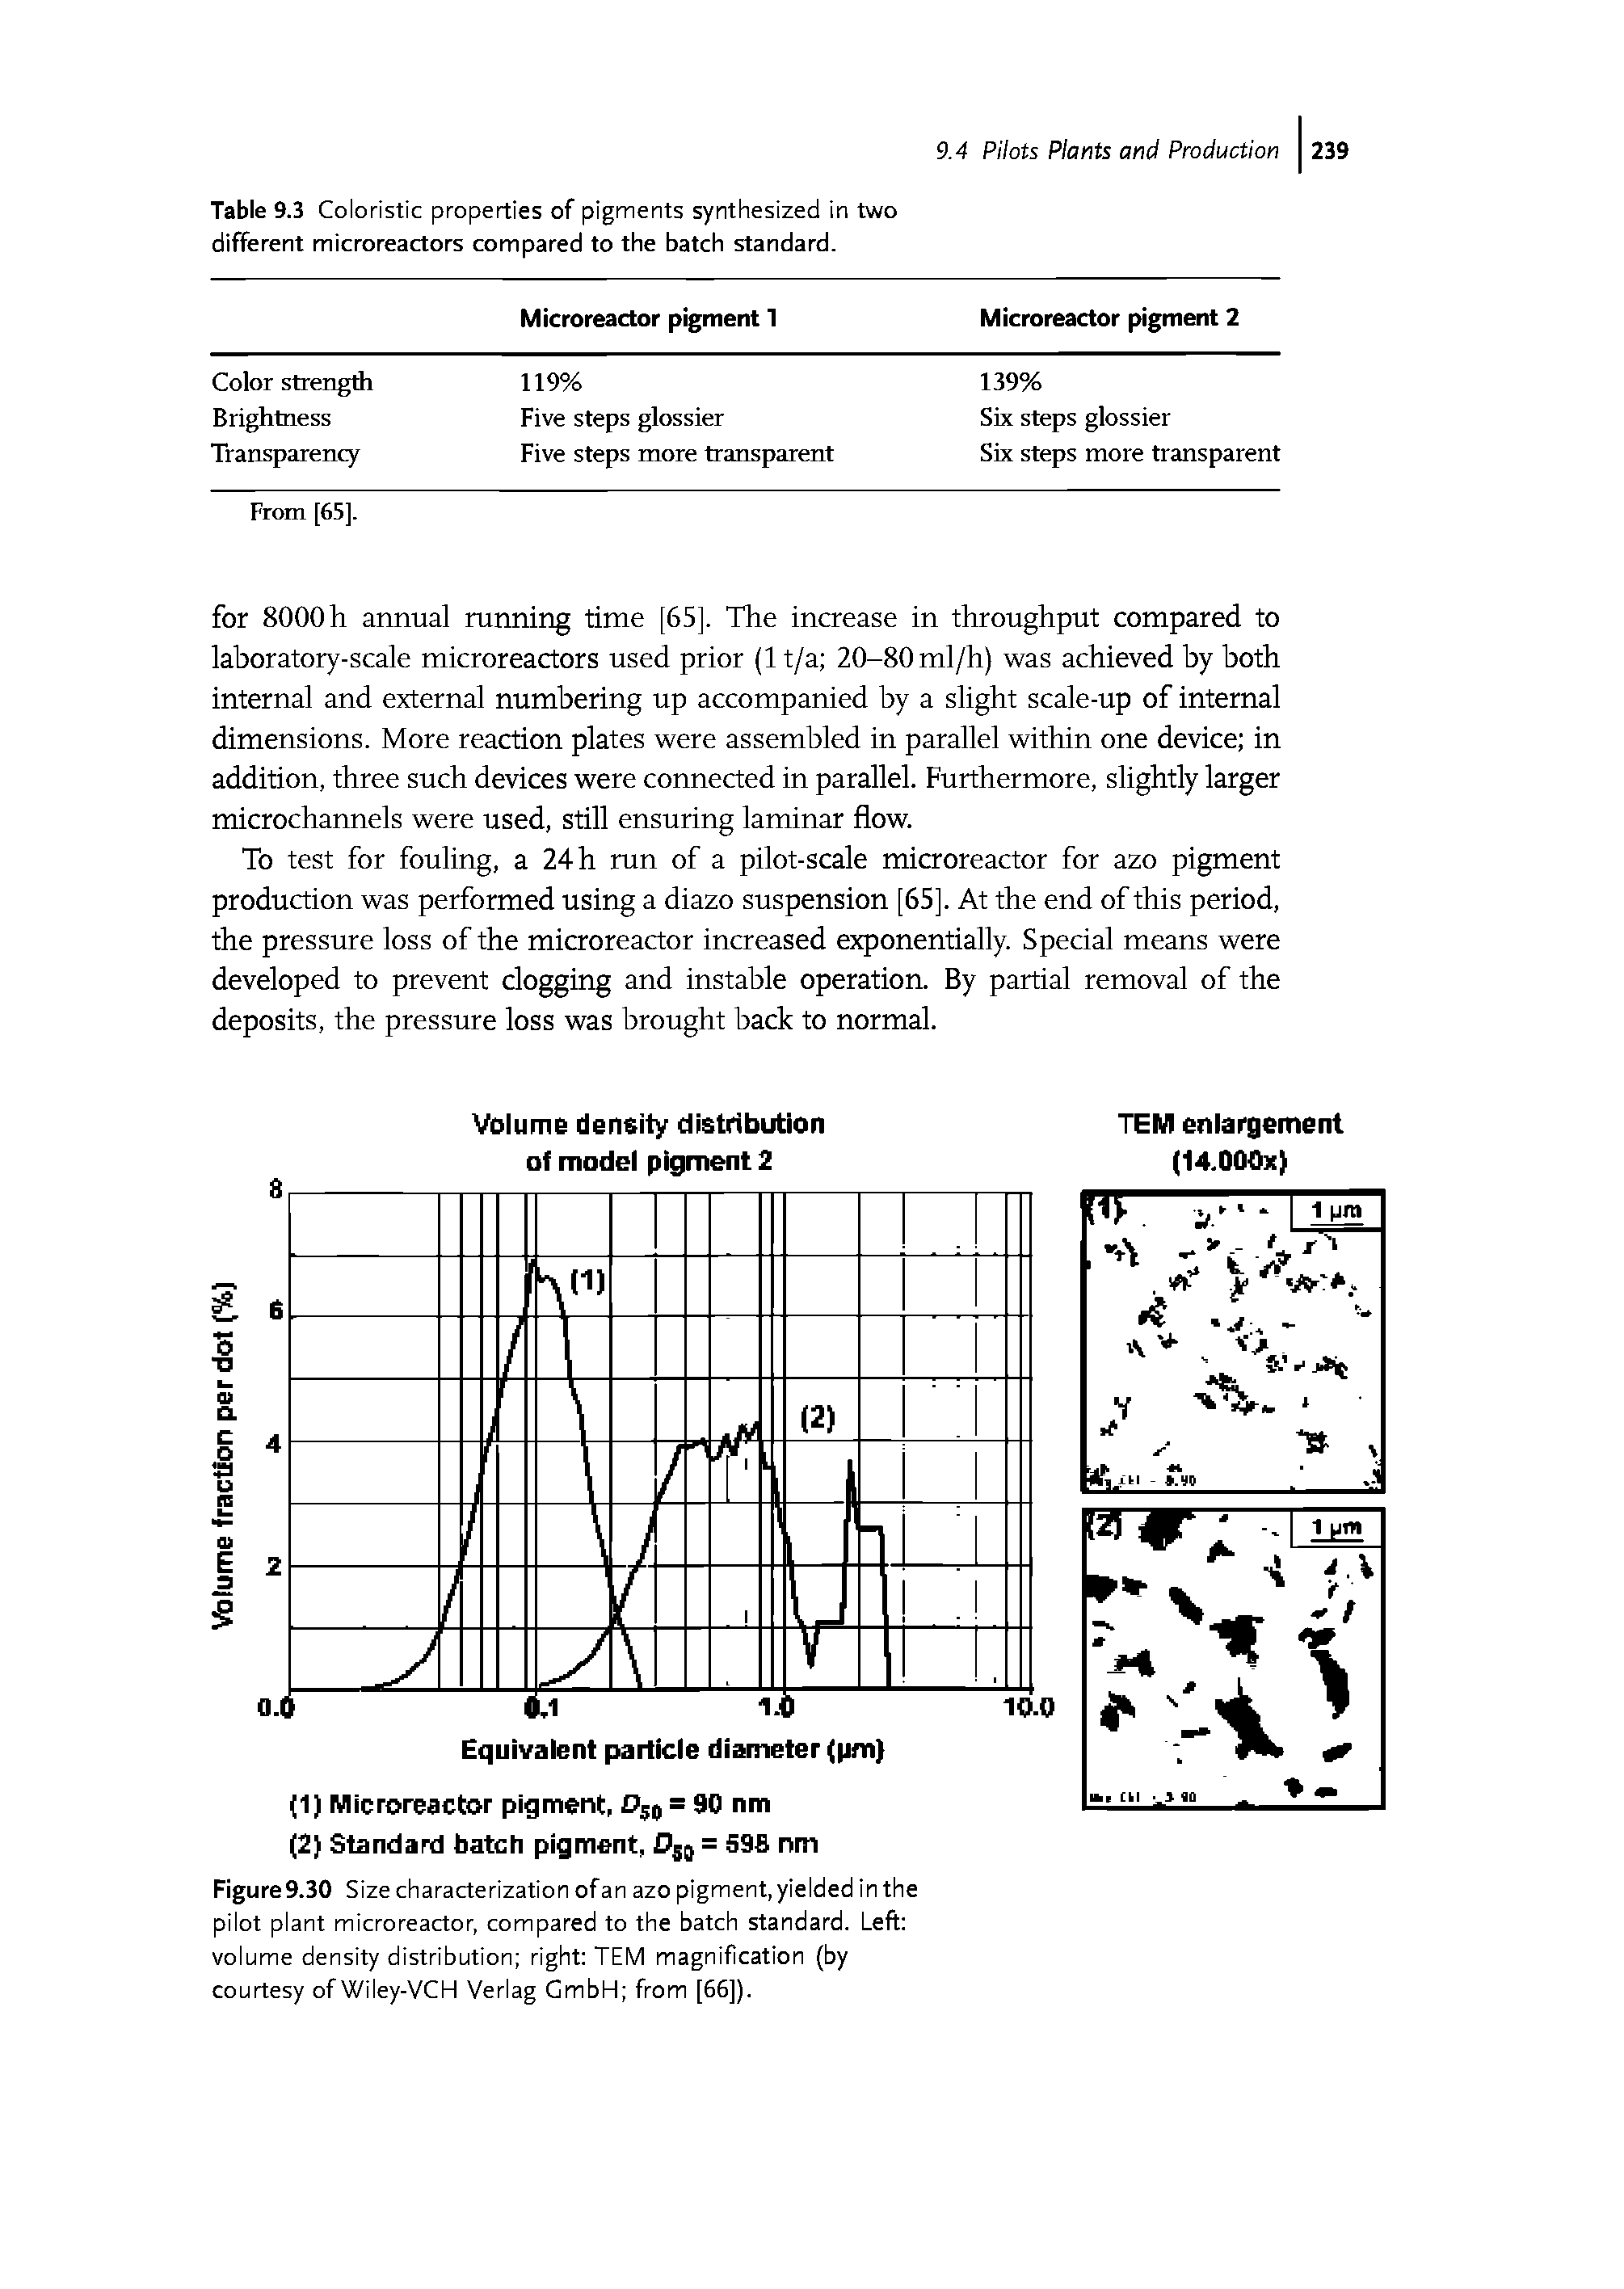 Figure 9.30 Size characterization of an azo pigment, yielded in the pilot plant microreactor, compared to the batch standard. Left volume density distribution right TEM magnification (by courtesy of Wiley-VCH Verlag GmbH from [66]).